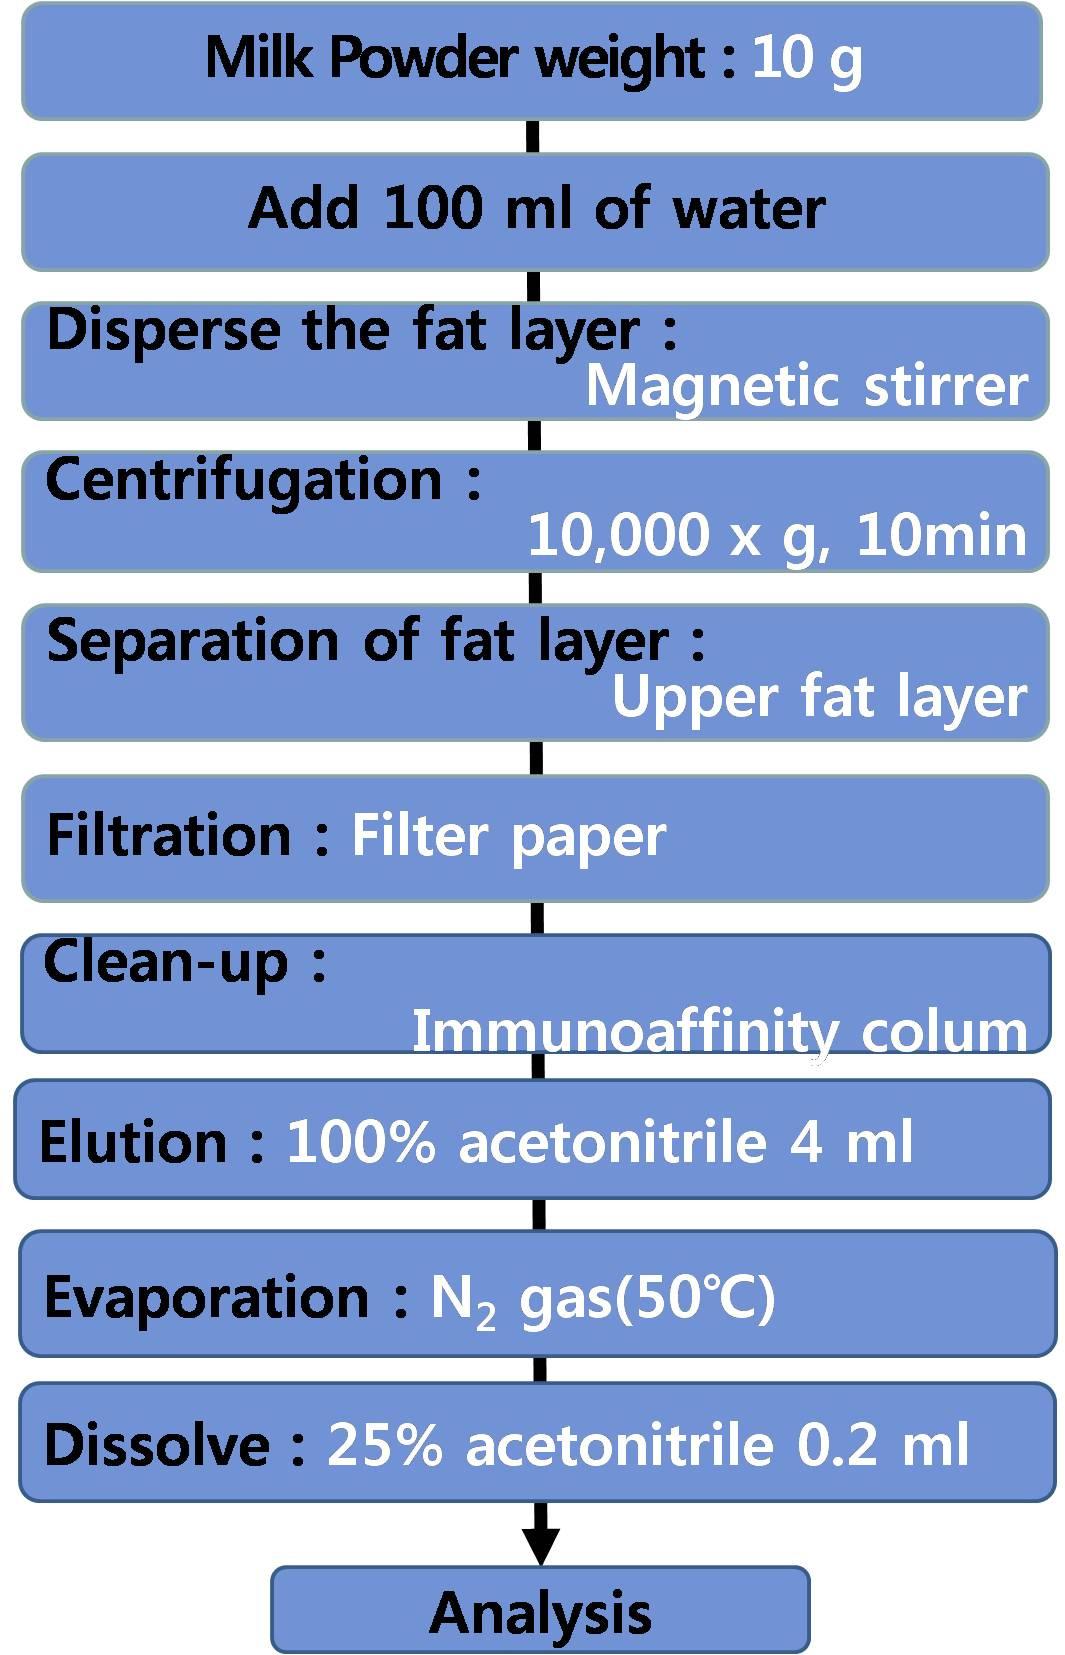 Procedure for detection of aflatoxin M1 of powdered milk.